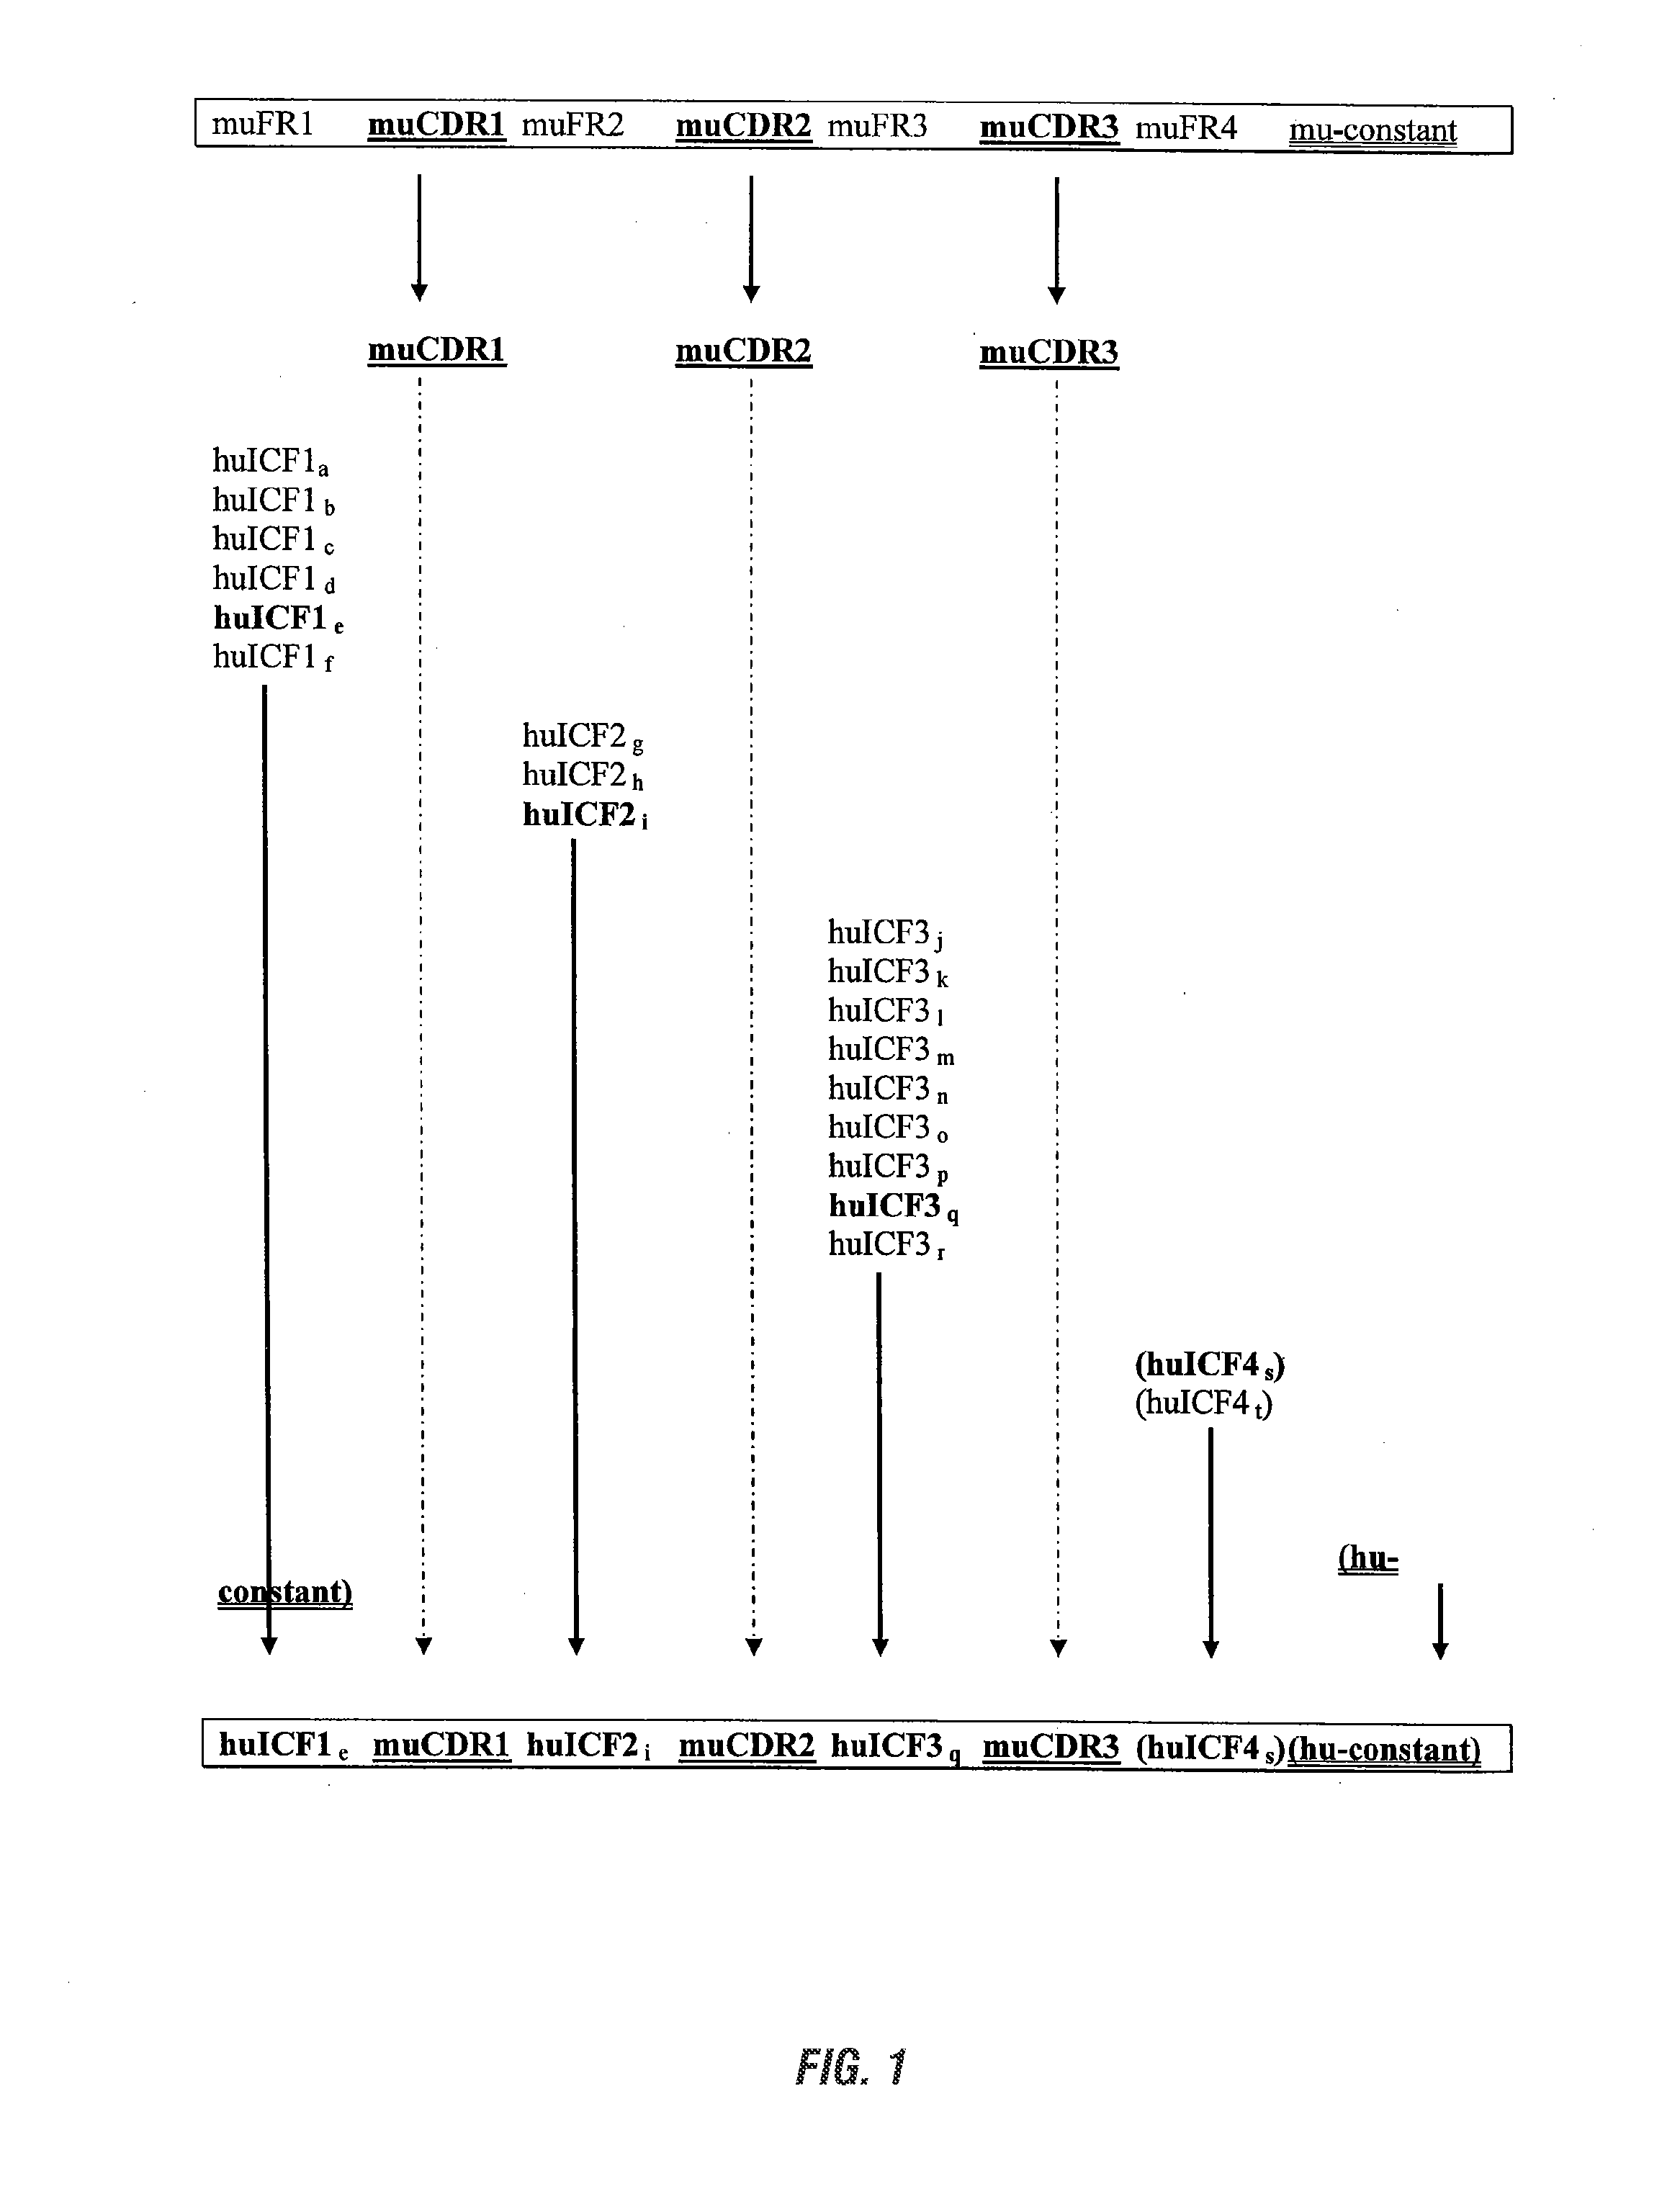 Antibodies and methods for making and using them